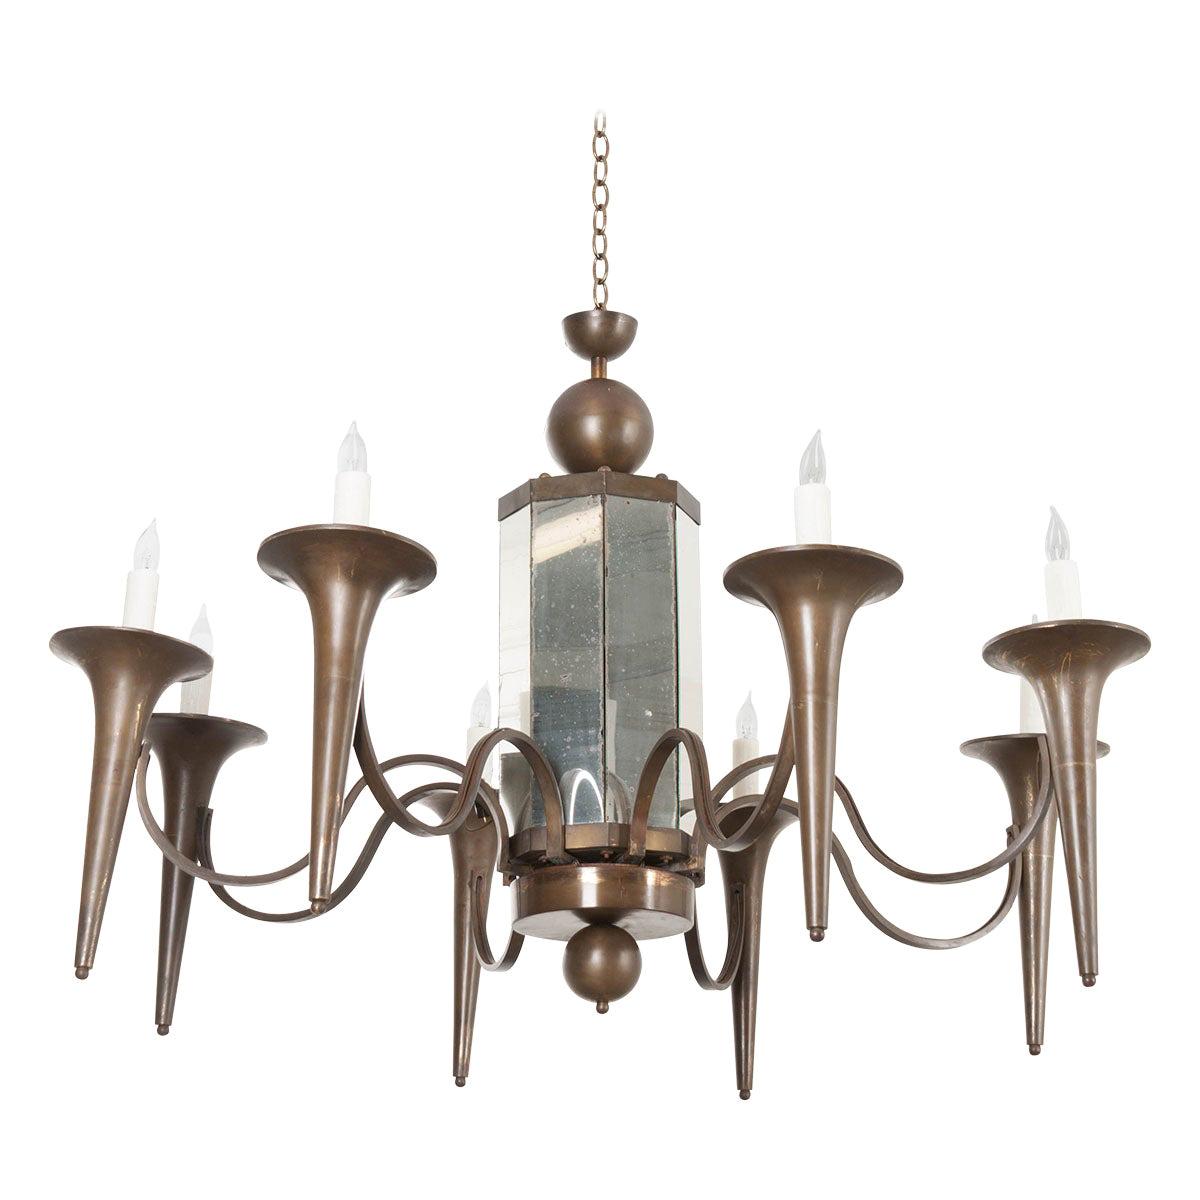 This fabulous and large pair of Art Modern bronze finished eight-light chandeliers, circa 1930s, are from France and feature a paneled and mirrored standard, composed of old and new mirror plates, suspending eight scroll-arms terminating with